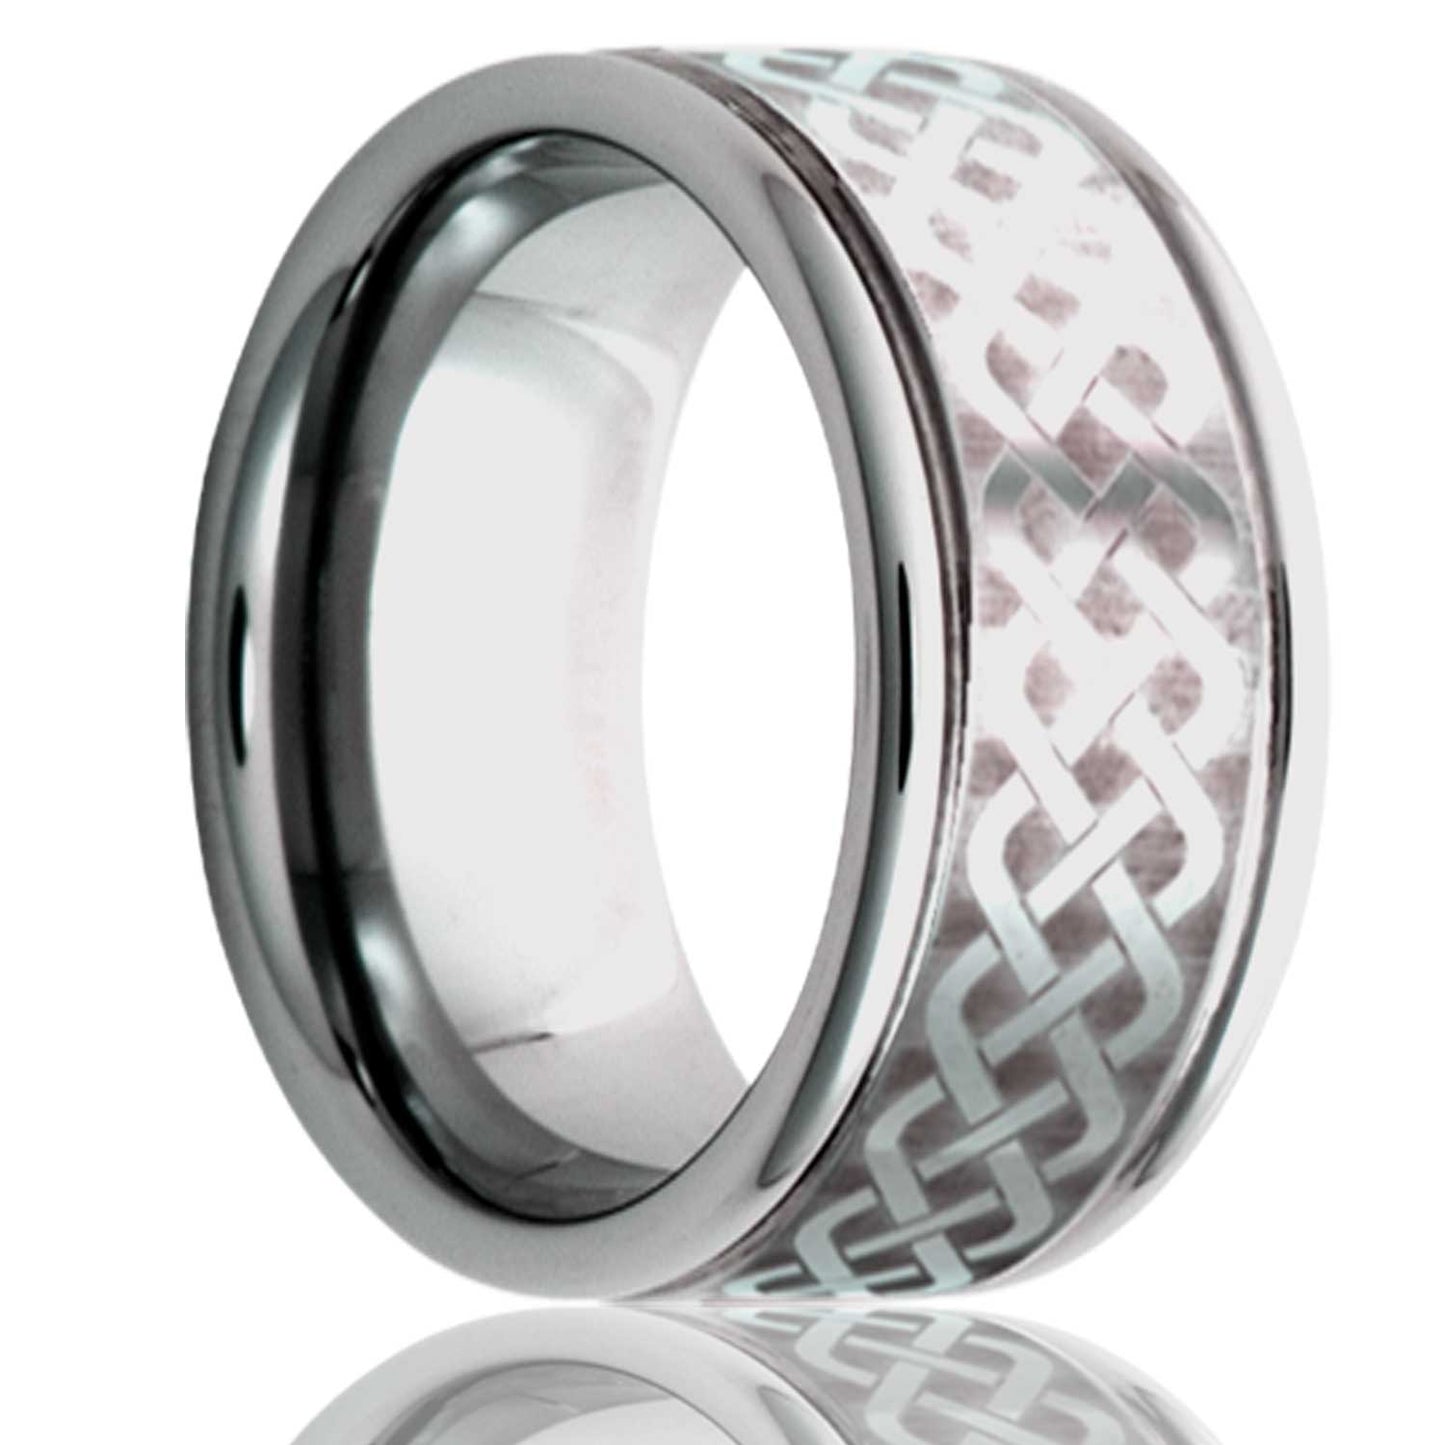 A celtic sailor's knot grooved cobalt wedding band displayed on a neutral white background.